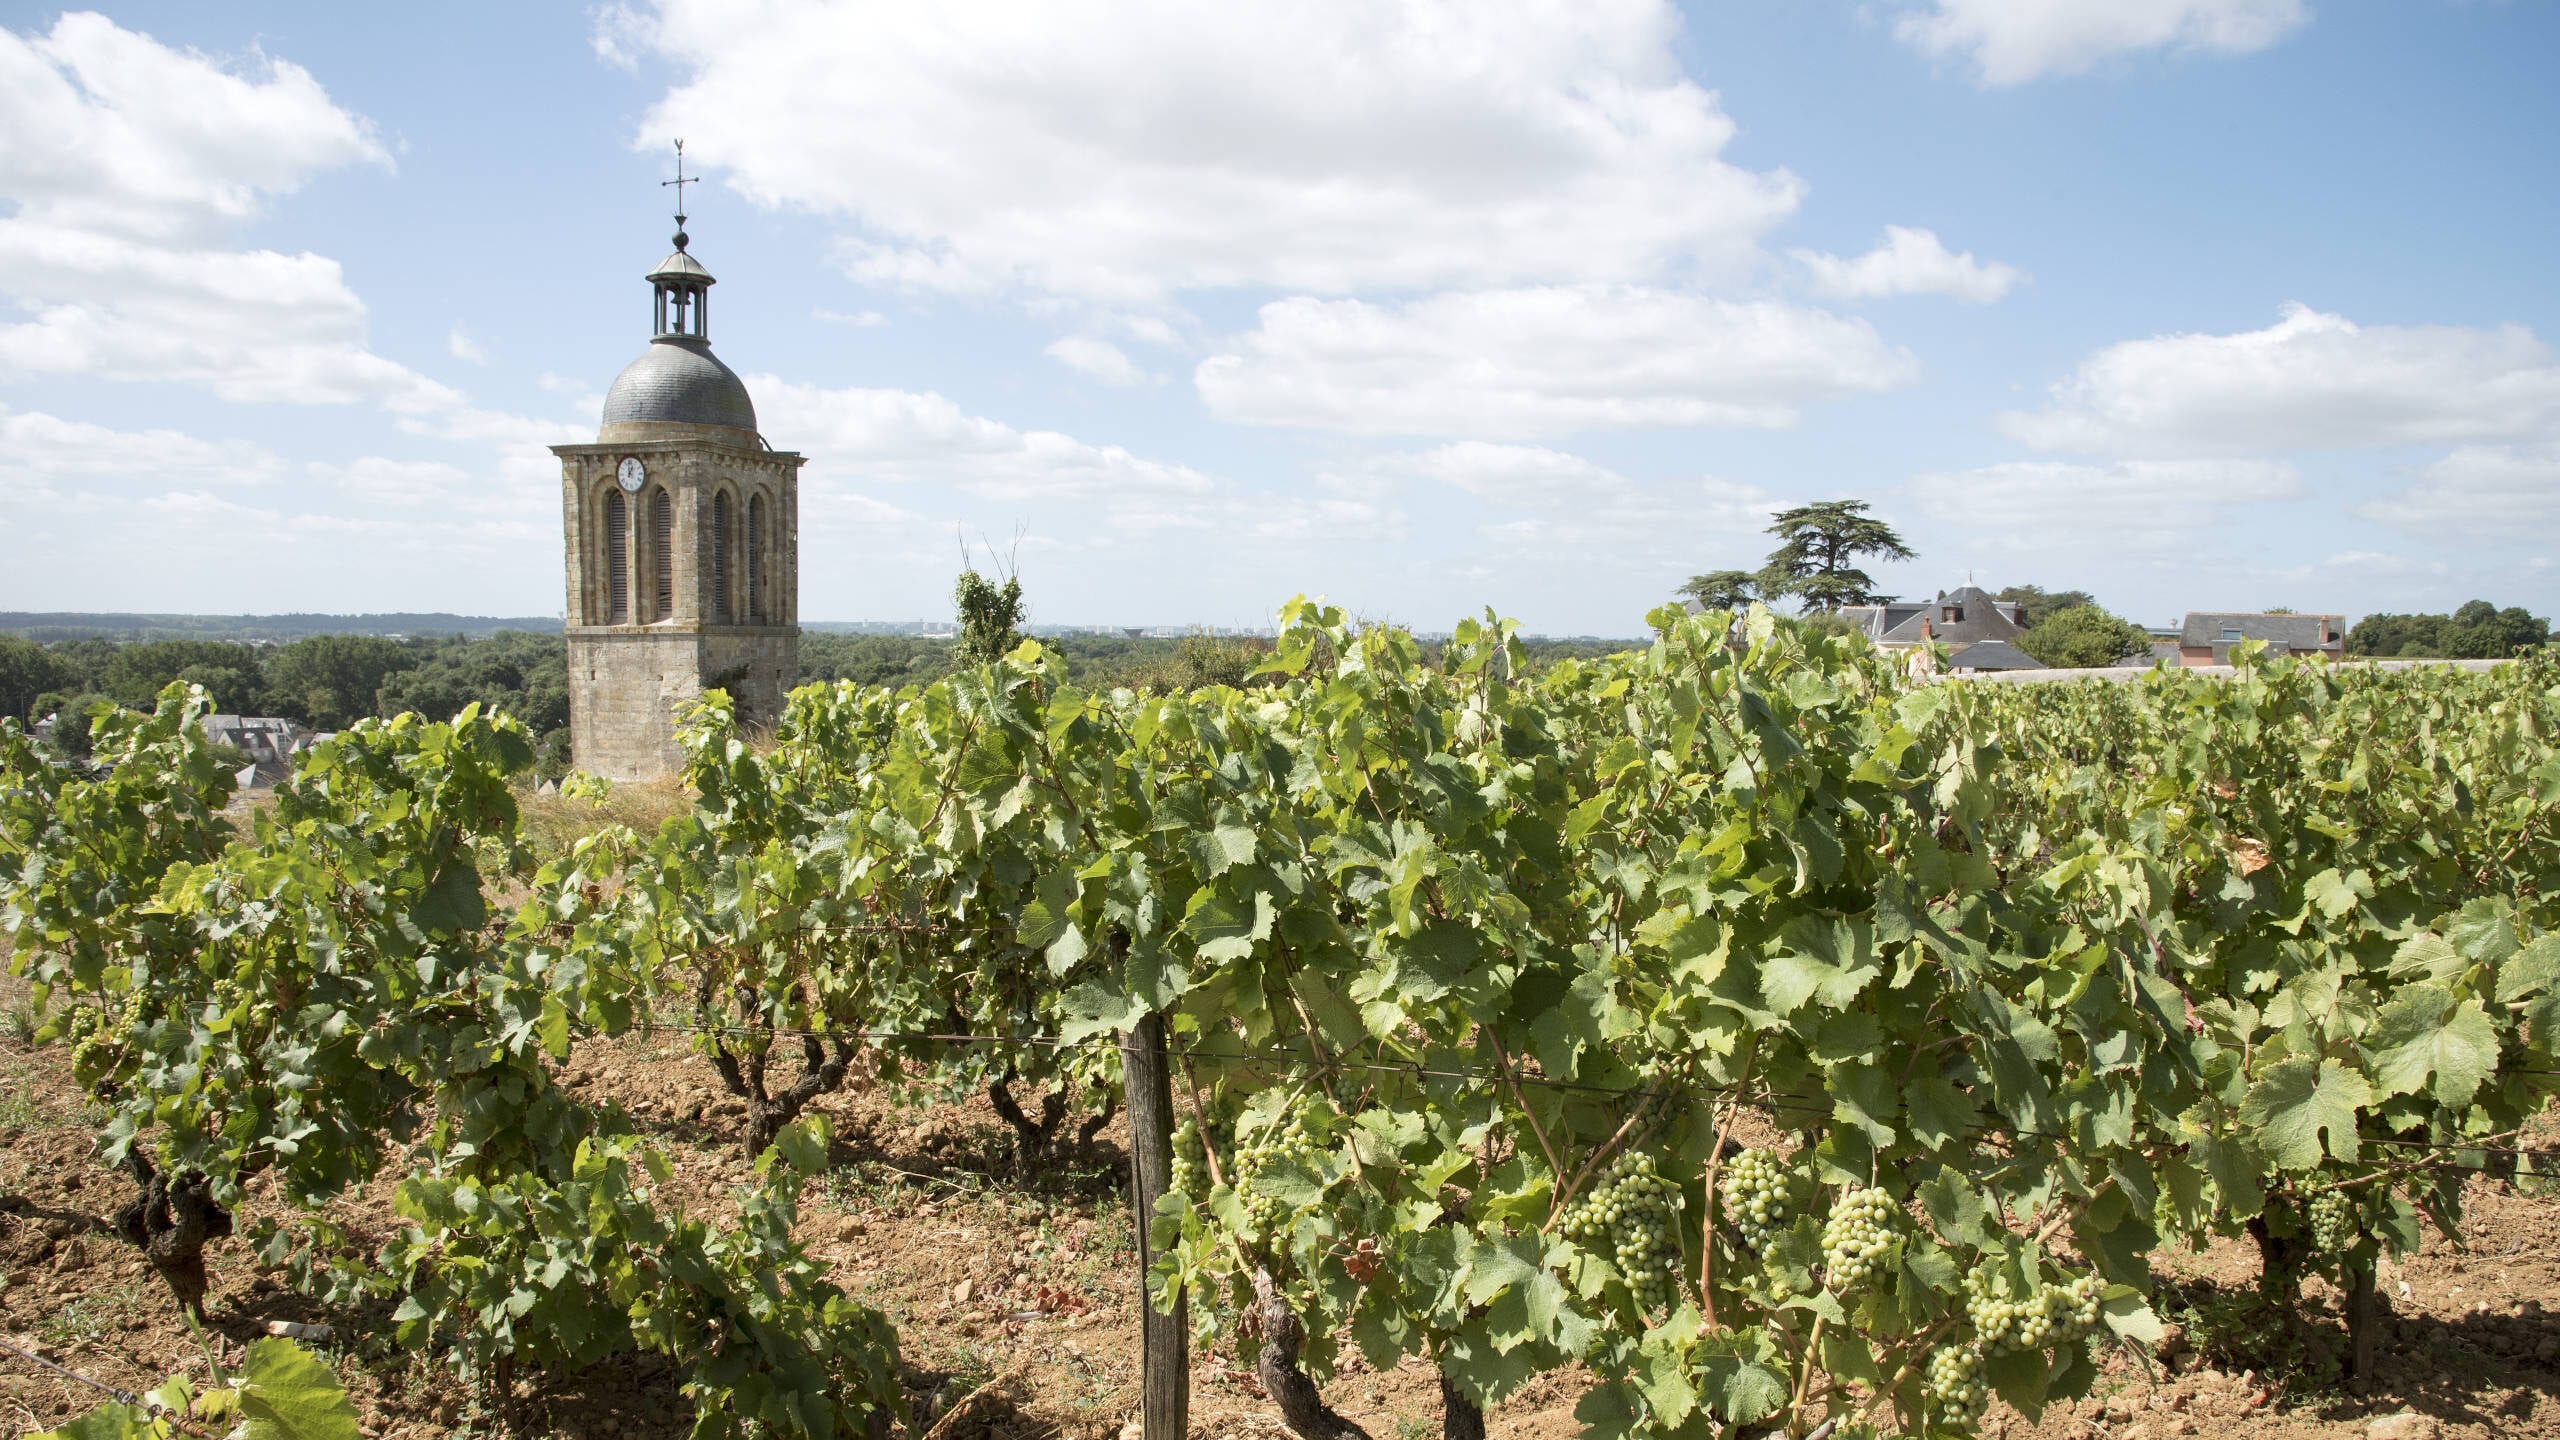 Church emerging in the background of a vineyard in Vouvray